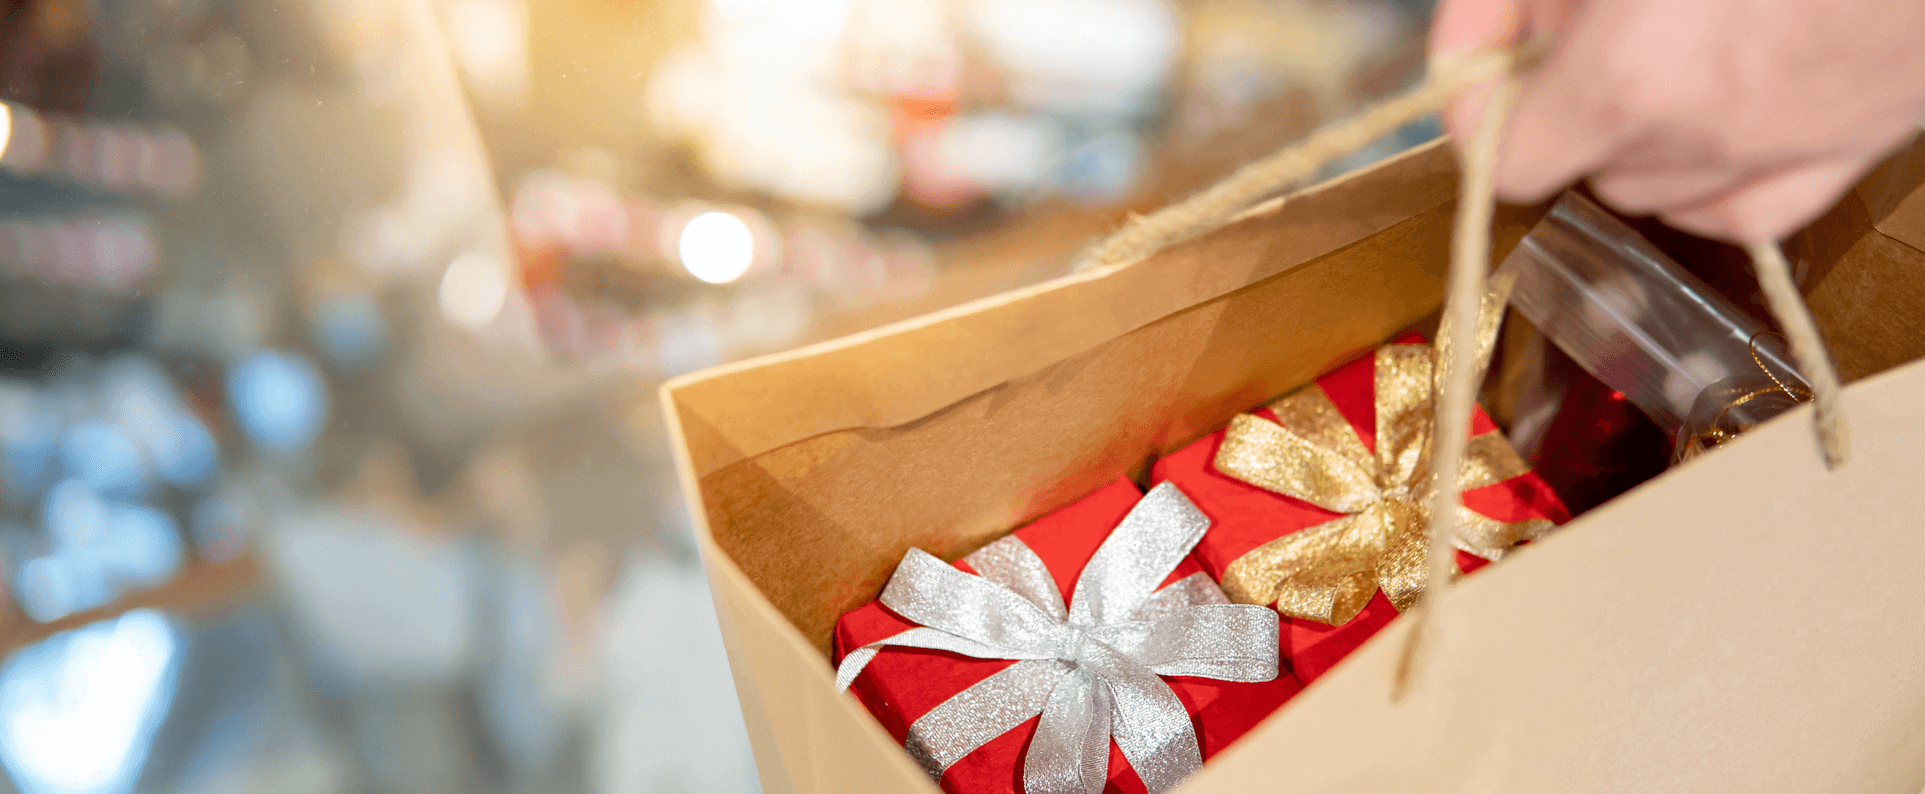 2022 Holiday Marketing Trends: What Consumers Are Planning to Spend On